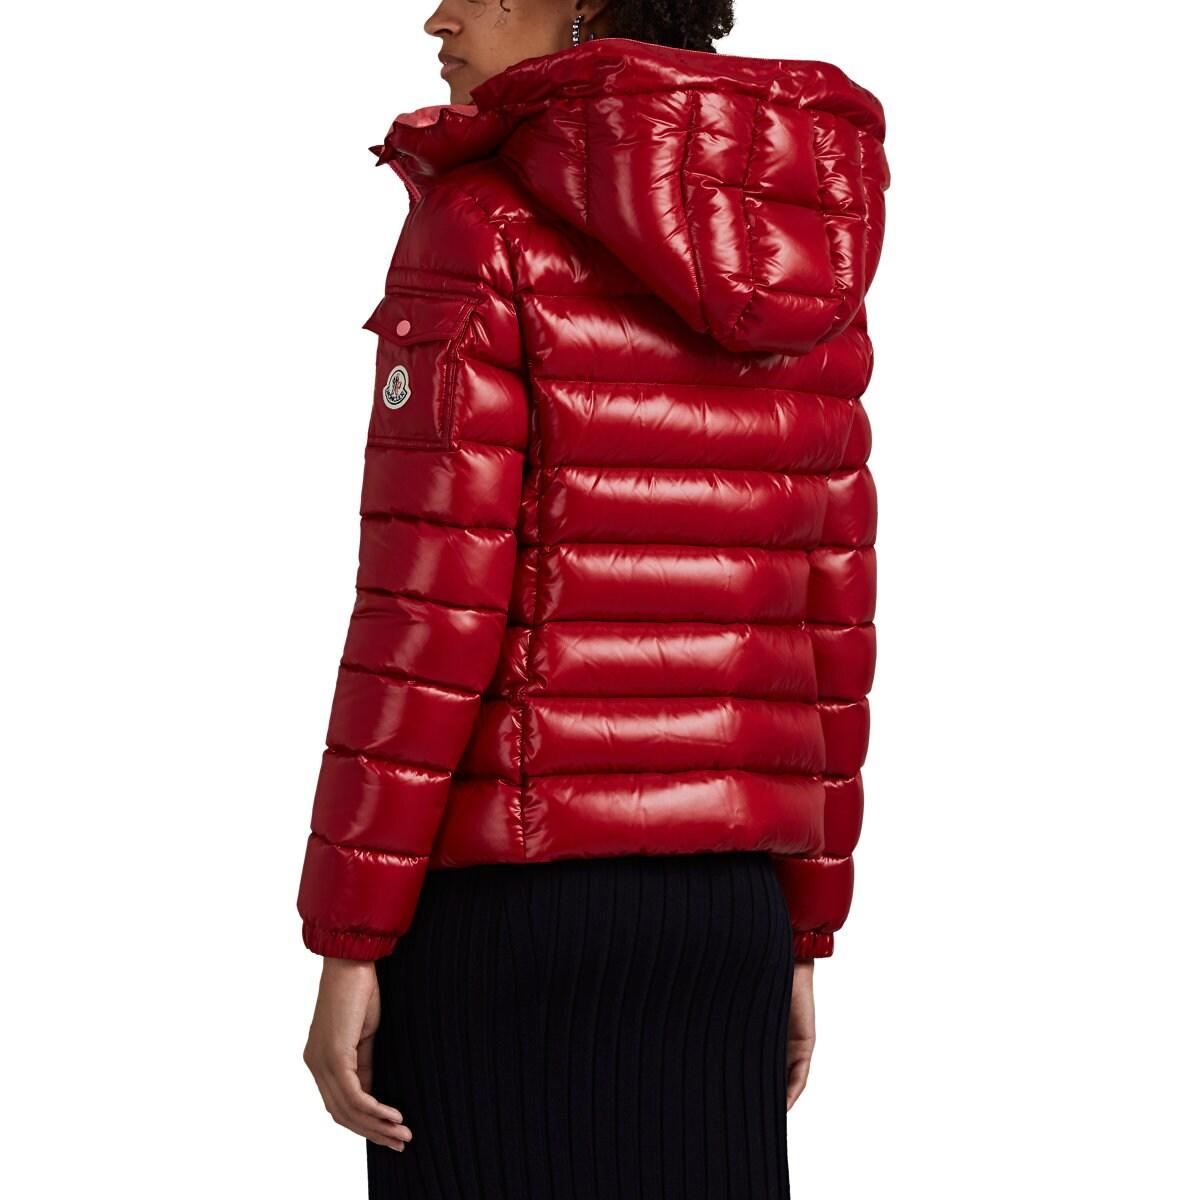 Moncler Bady Fur-trimmed Down Puffer Coat in Red - Lyst